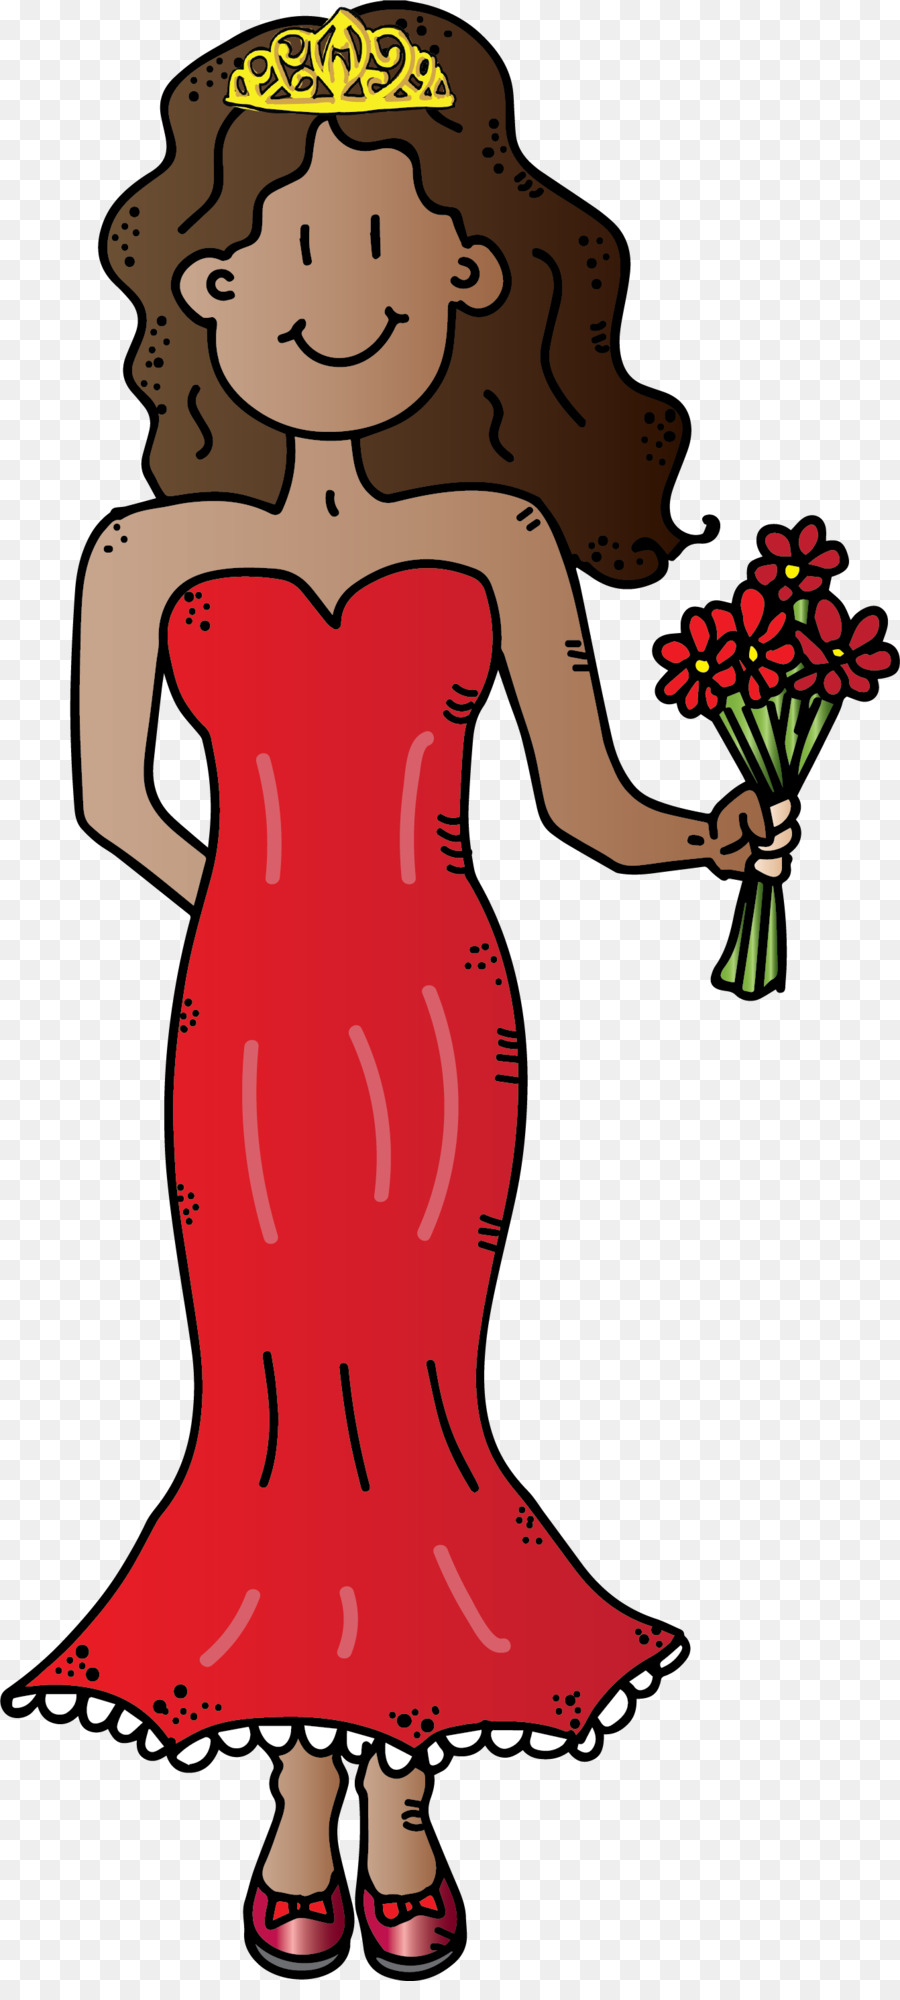 Woman Art Clip art - prom png download - 1342*2954 - Free Transparent Woman png Download.